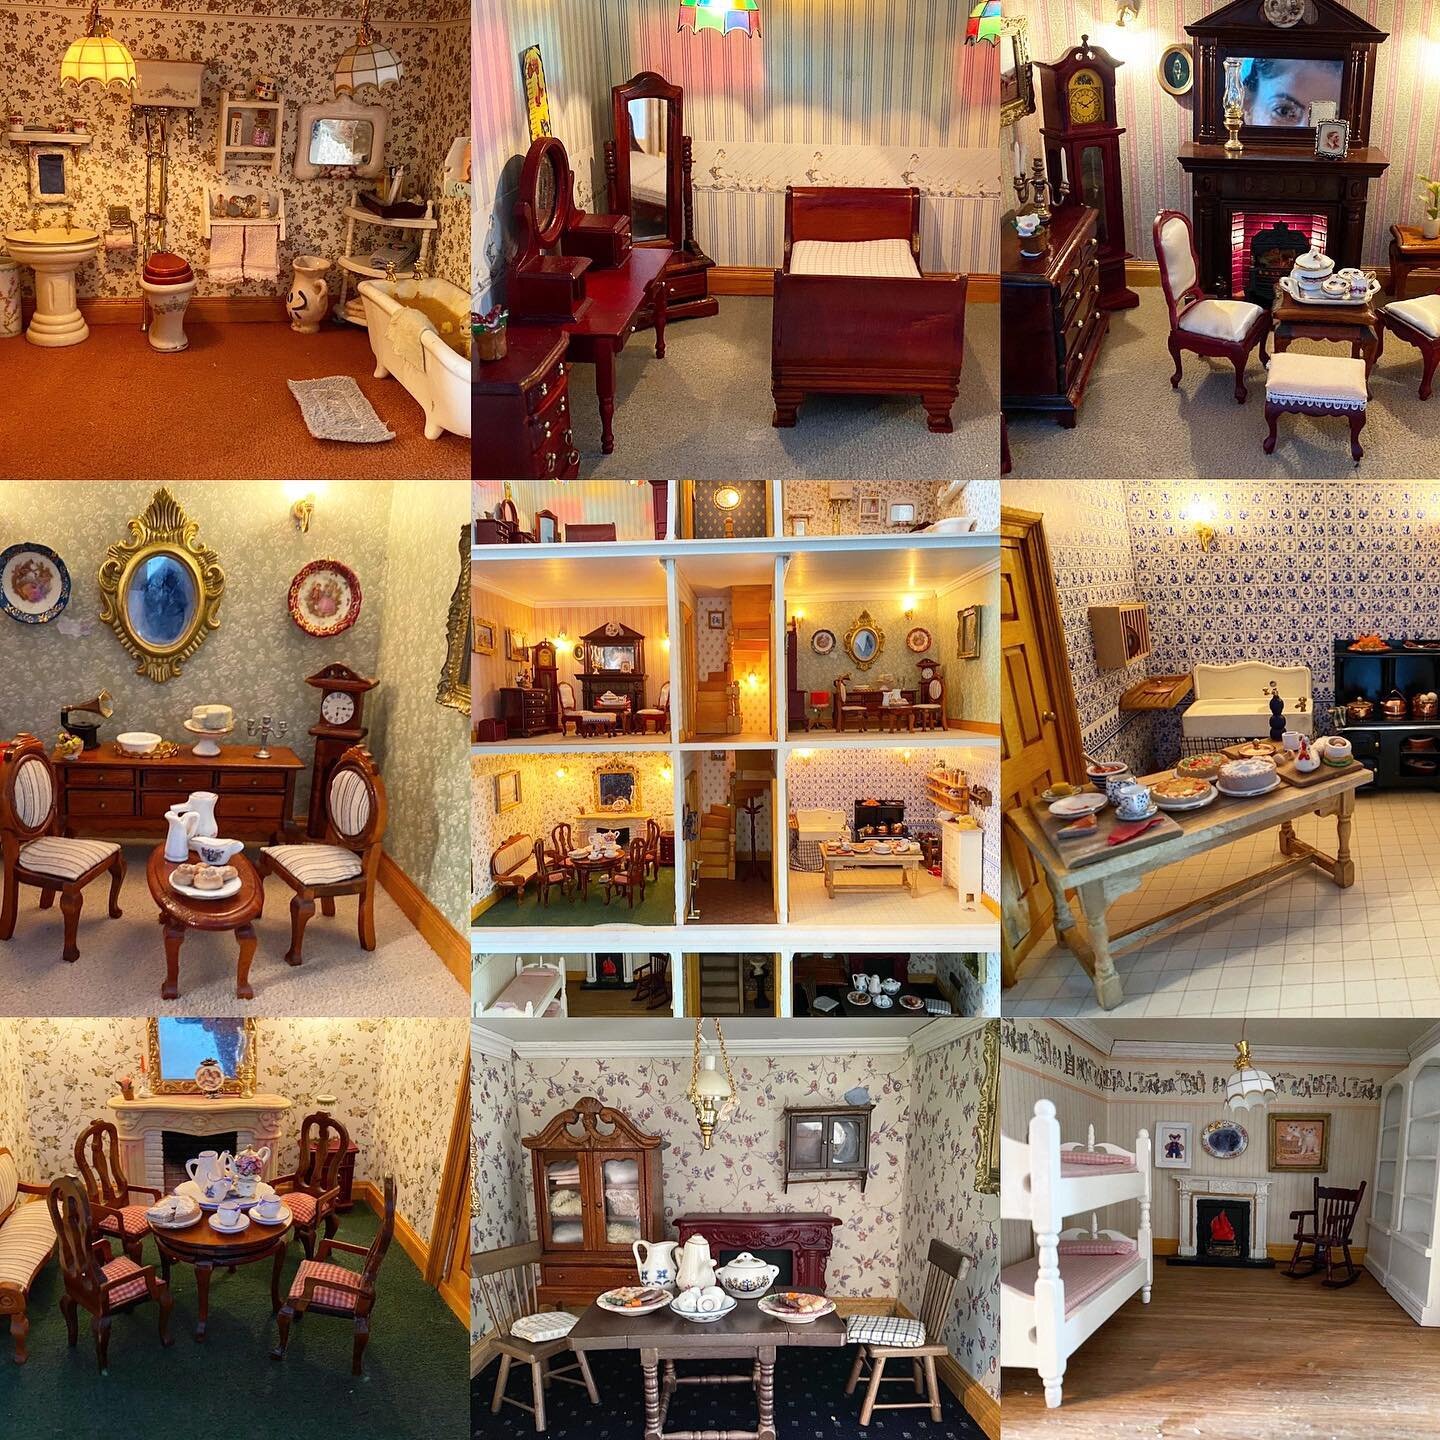 The rooms of this dollhouse contain so much detail!